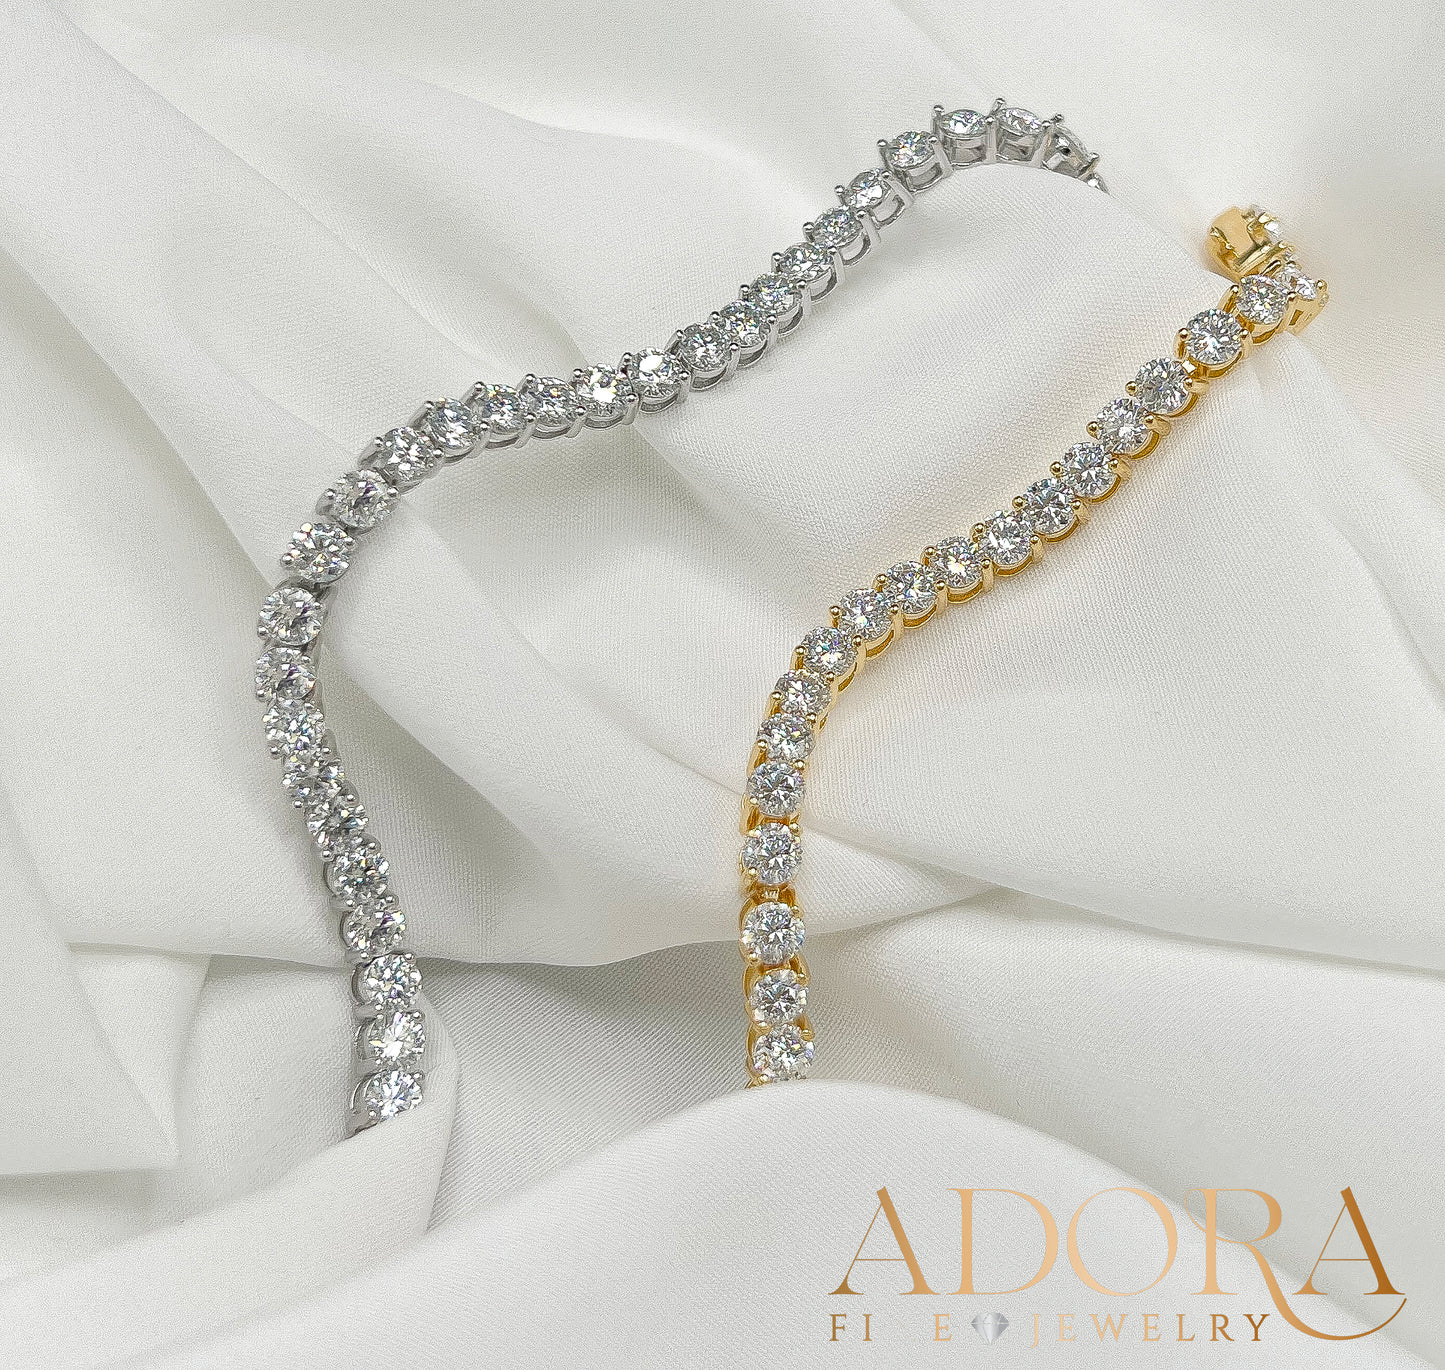 Tennis Bracelet | 4.0 mm | Moissanite | 2 Prong Round Setting | 7.0 Inches | 925 Sterling Silver with Platinum Plating or 24K Gold Plating - Adora Fine Jewelry